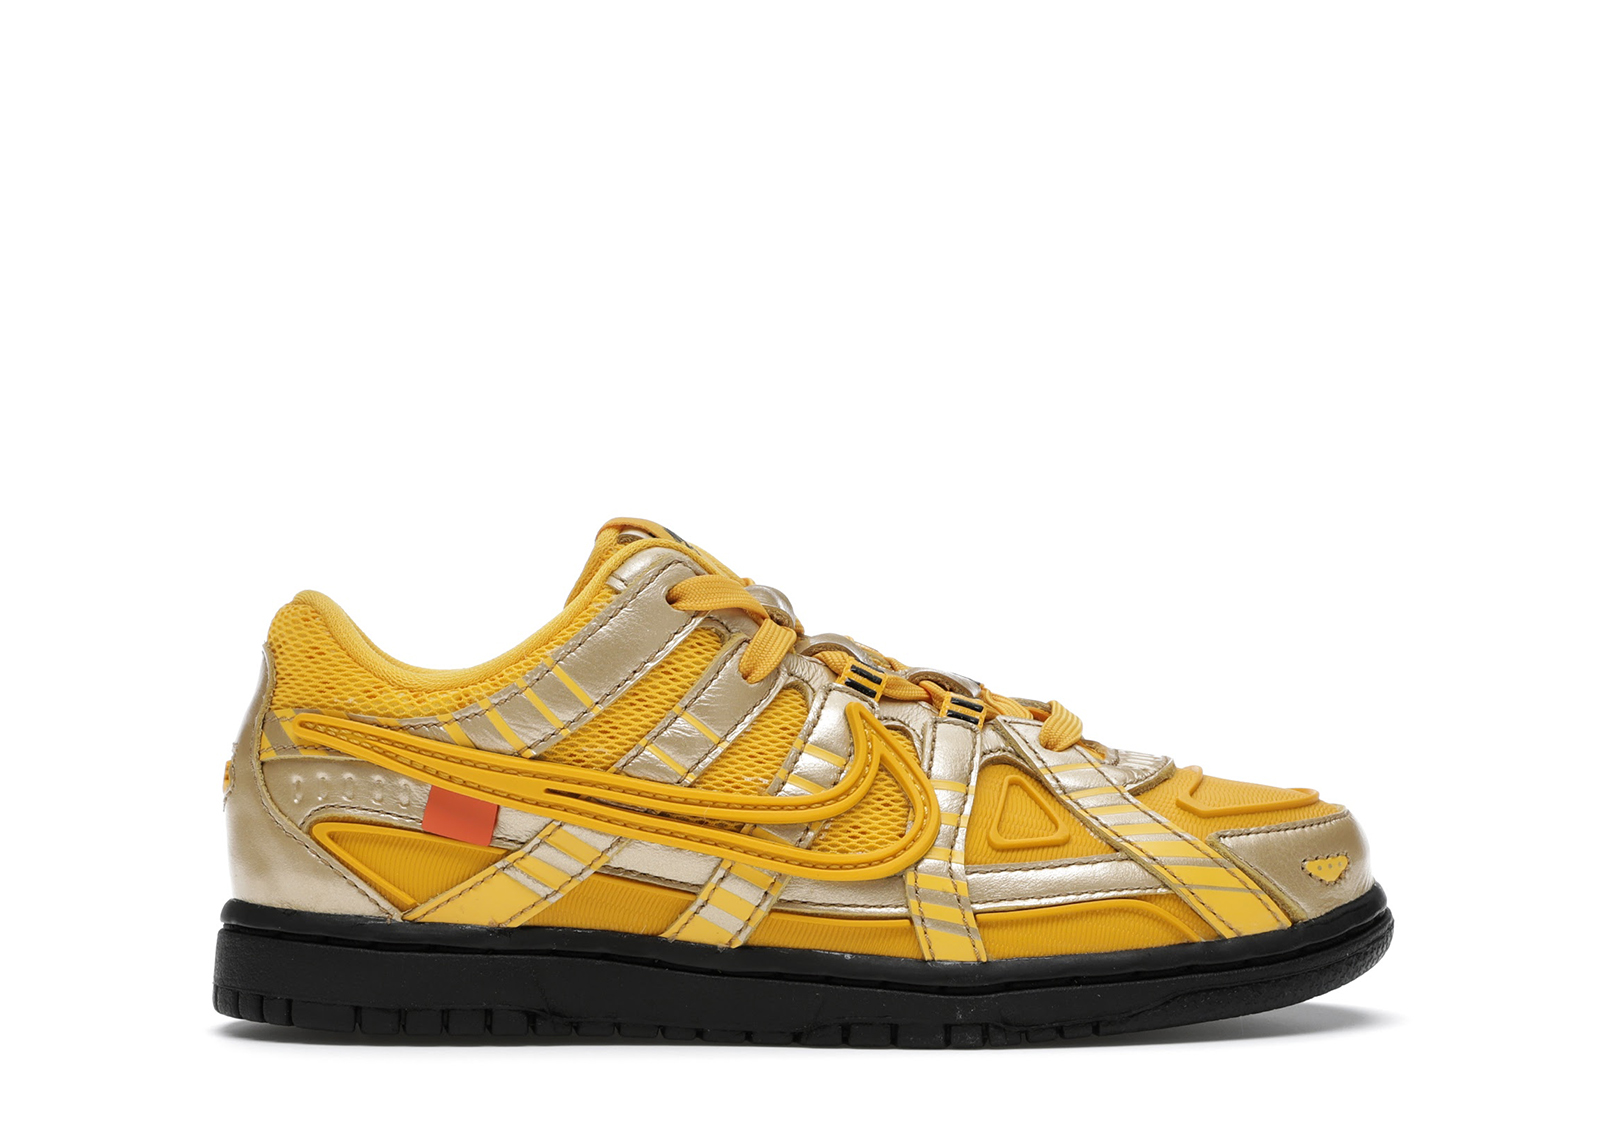 Nike Air Rubber Dunk Off-White University Gold (PS) Kids' - CW7410 